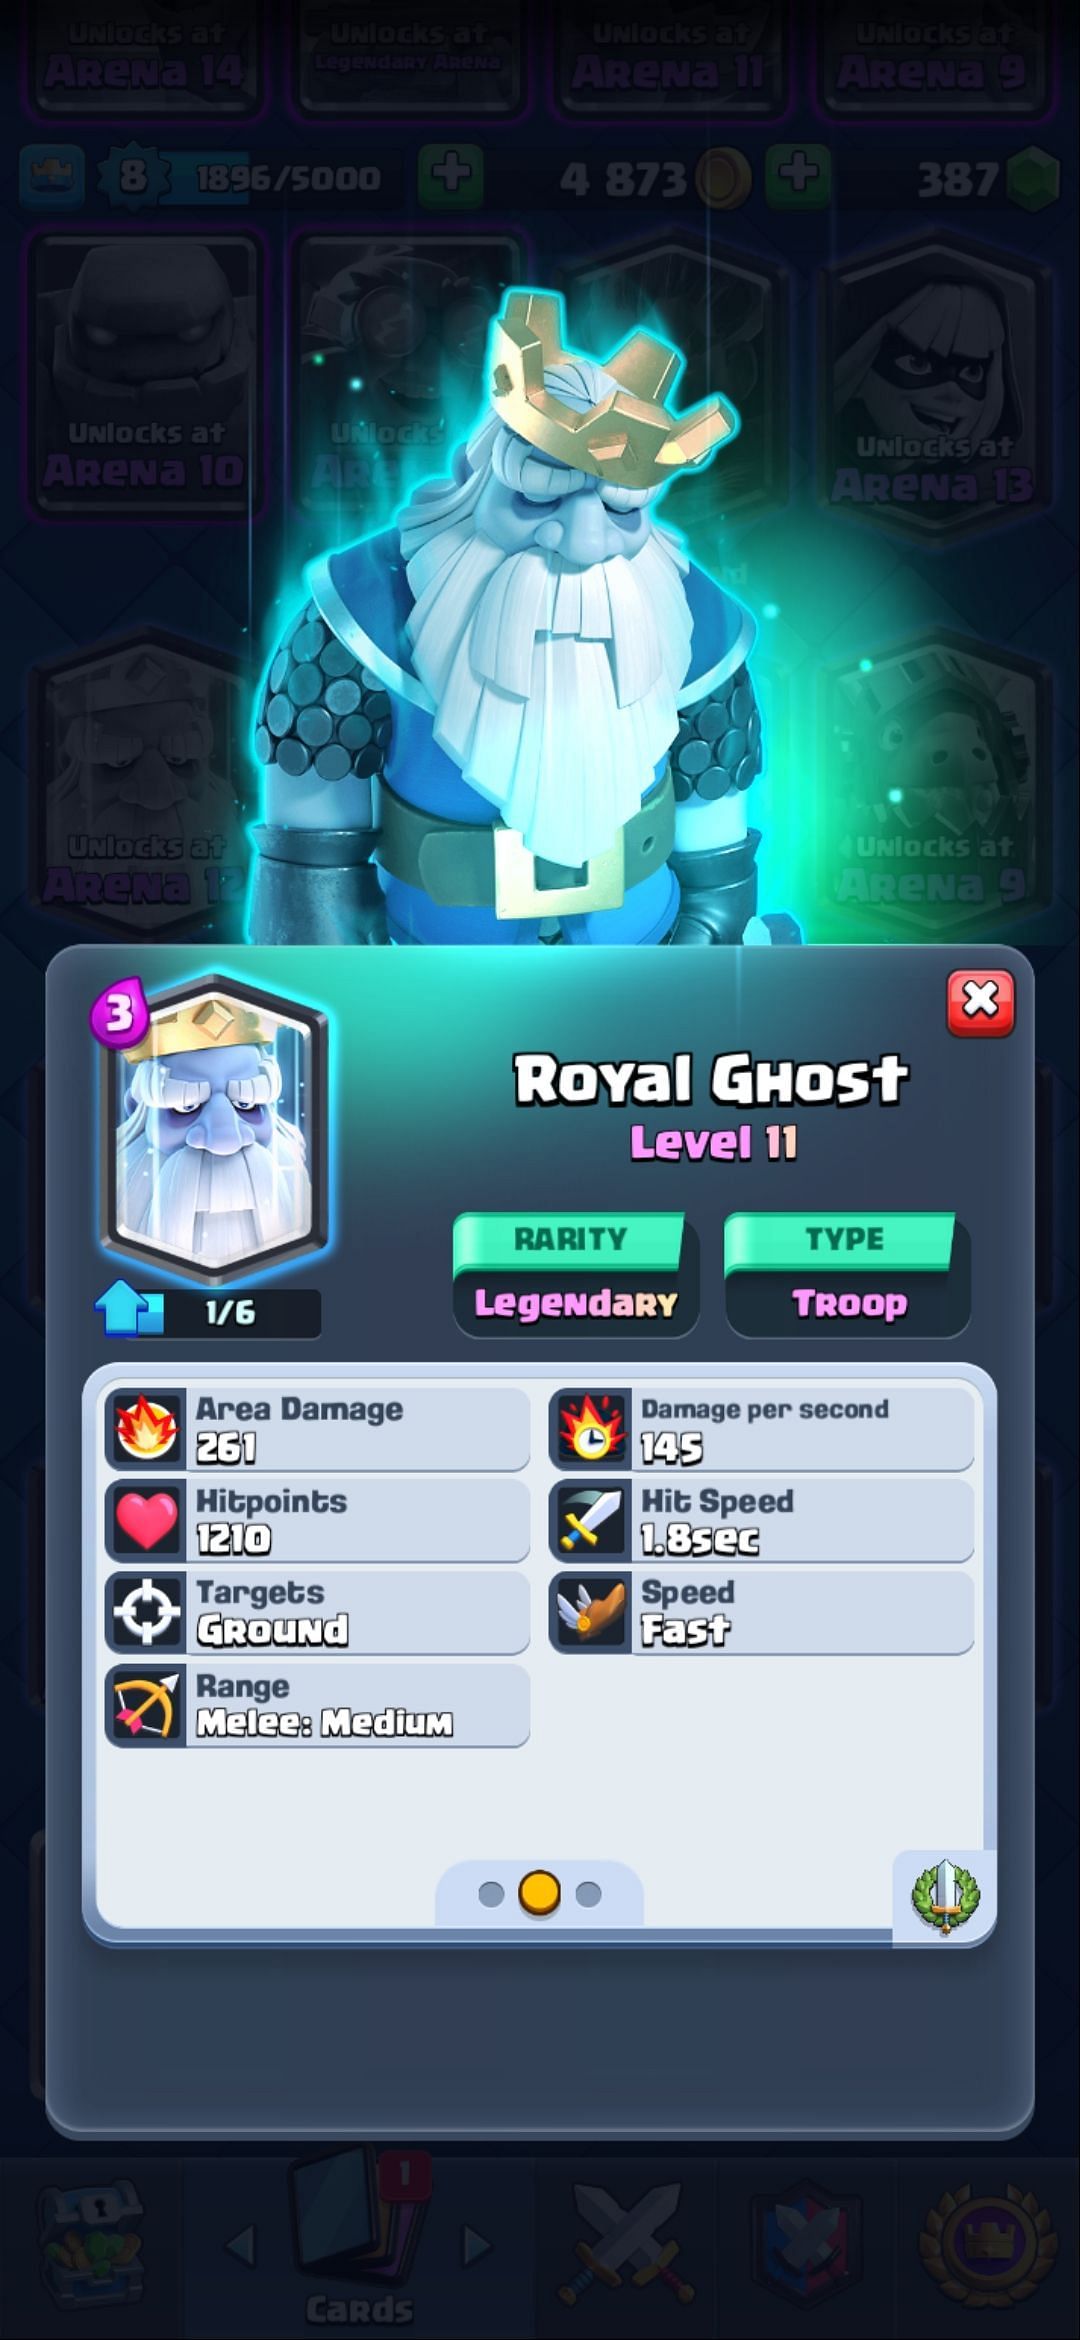 The Royal Ghost (Image via Supercell)